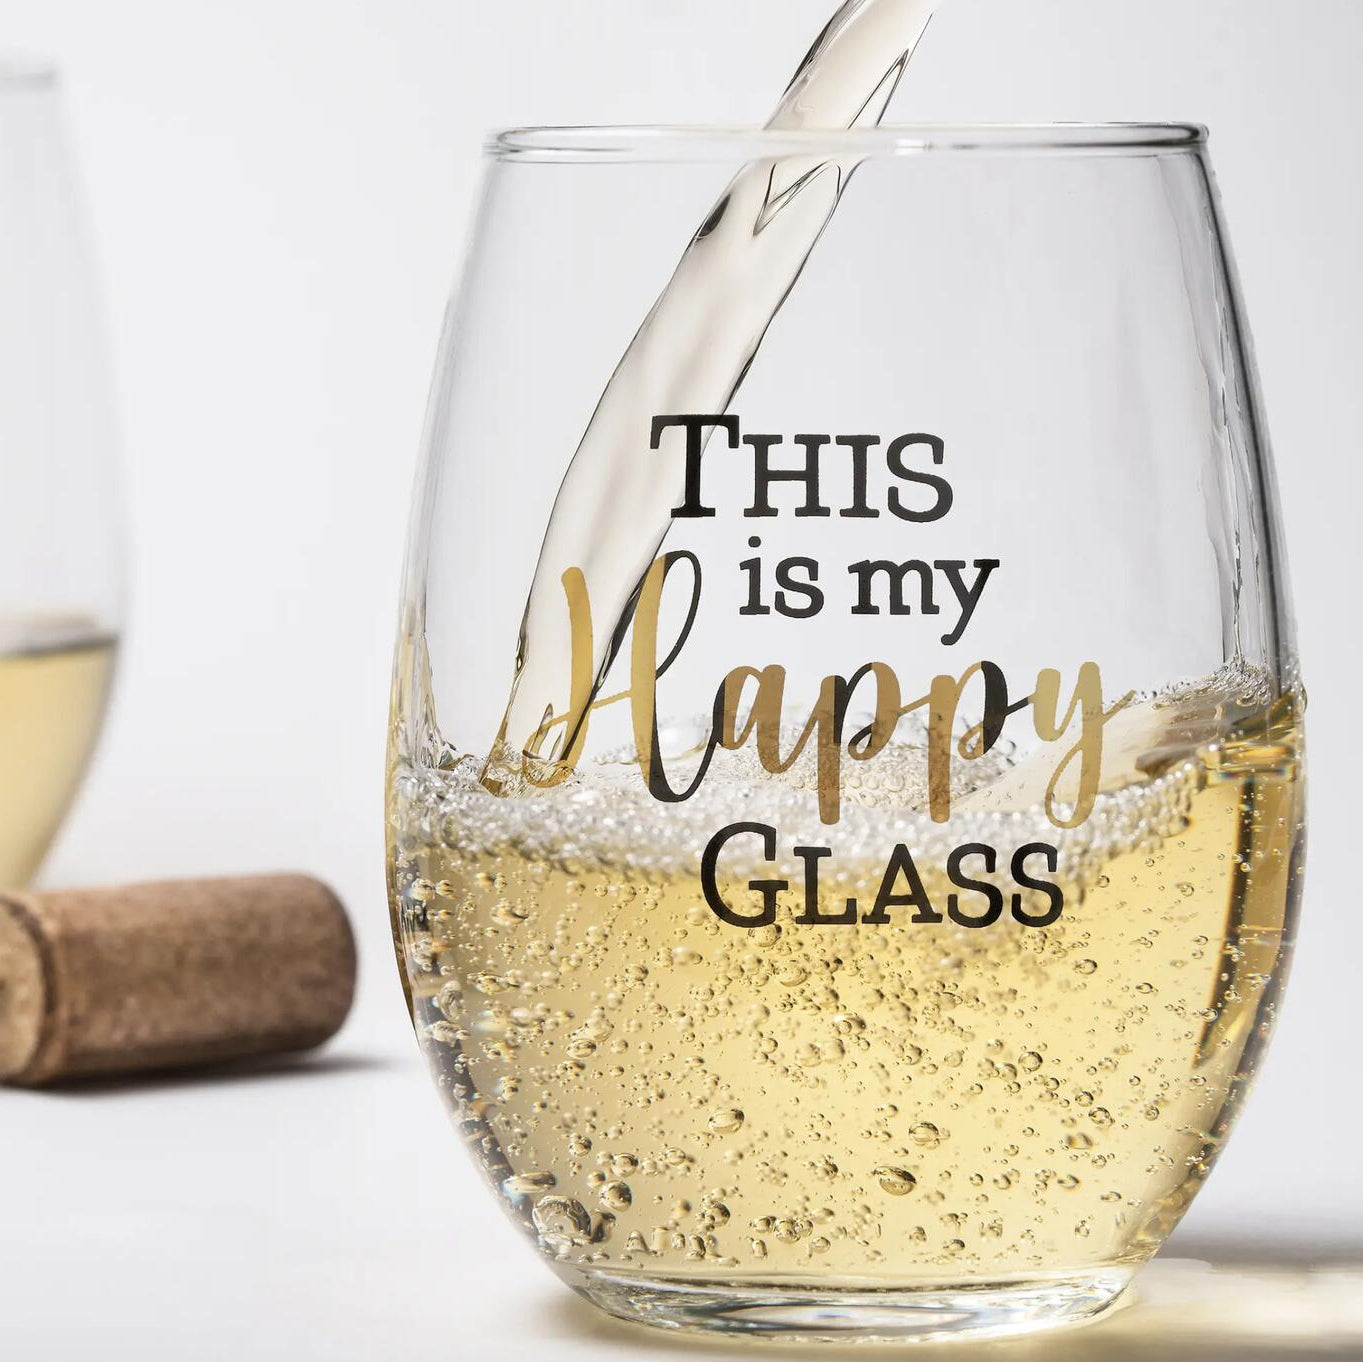 Stemless Wine Glass Set of 2- Luster Green – Studio 77 Gifts & Accessories